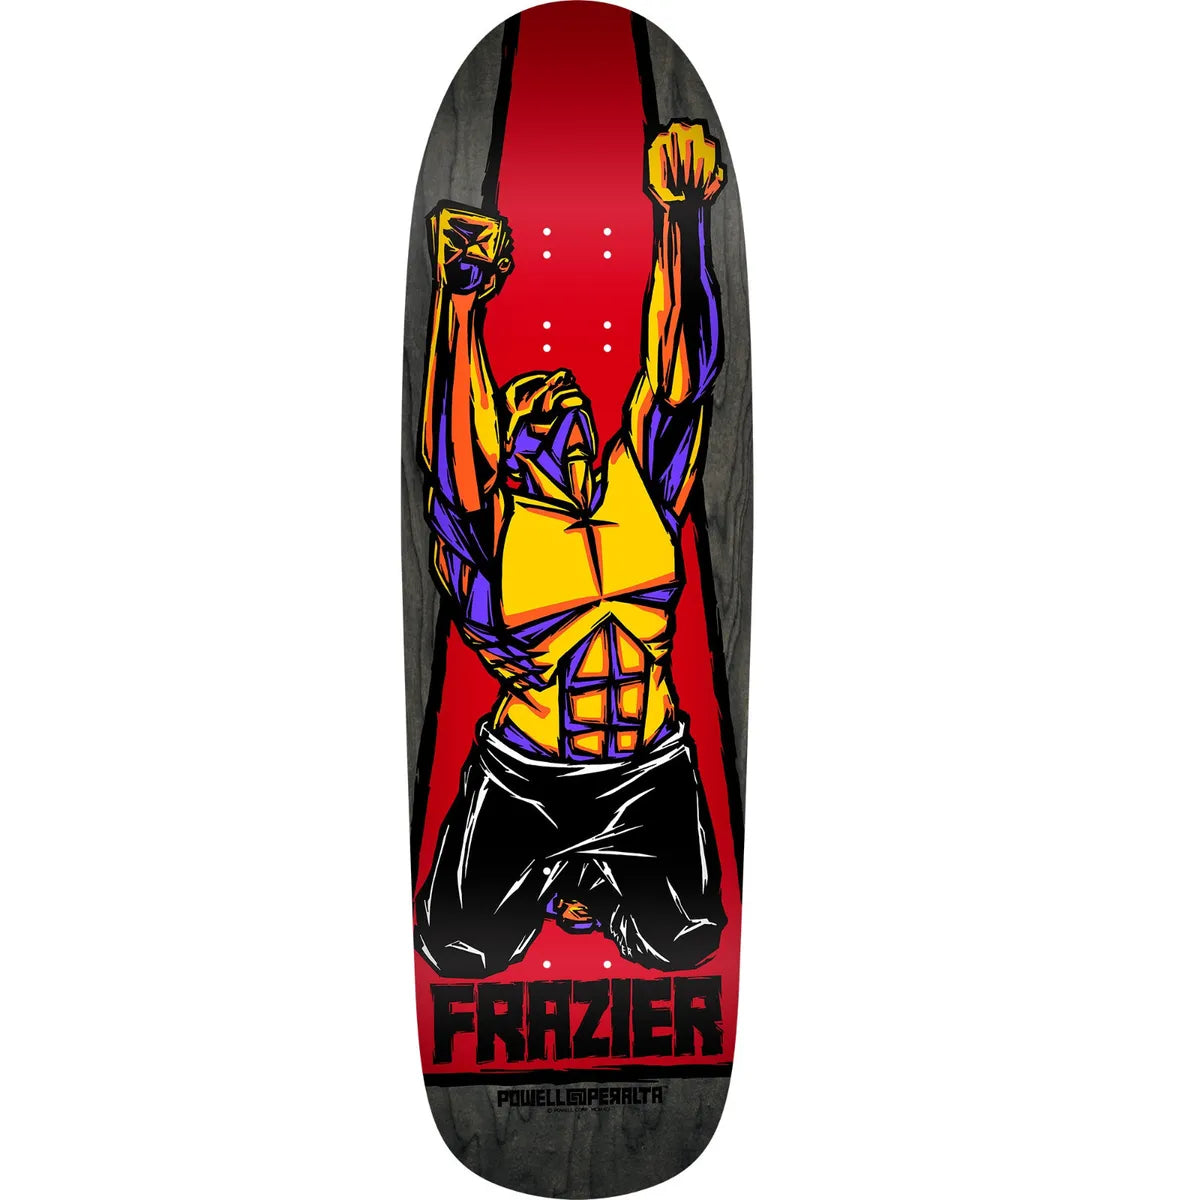 9.5 Powell Peralta Mike Valleley Frazier Skate Deck